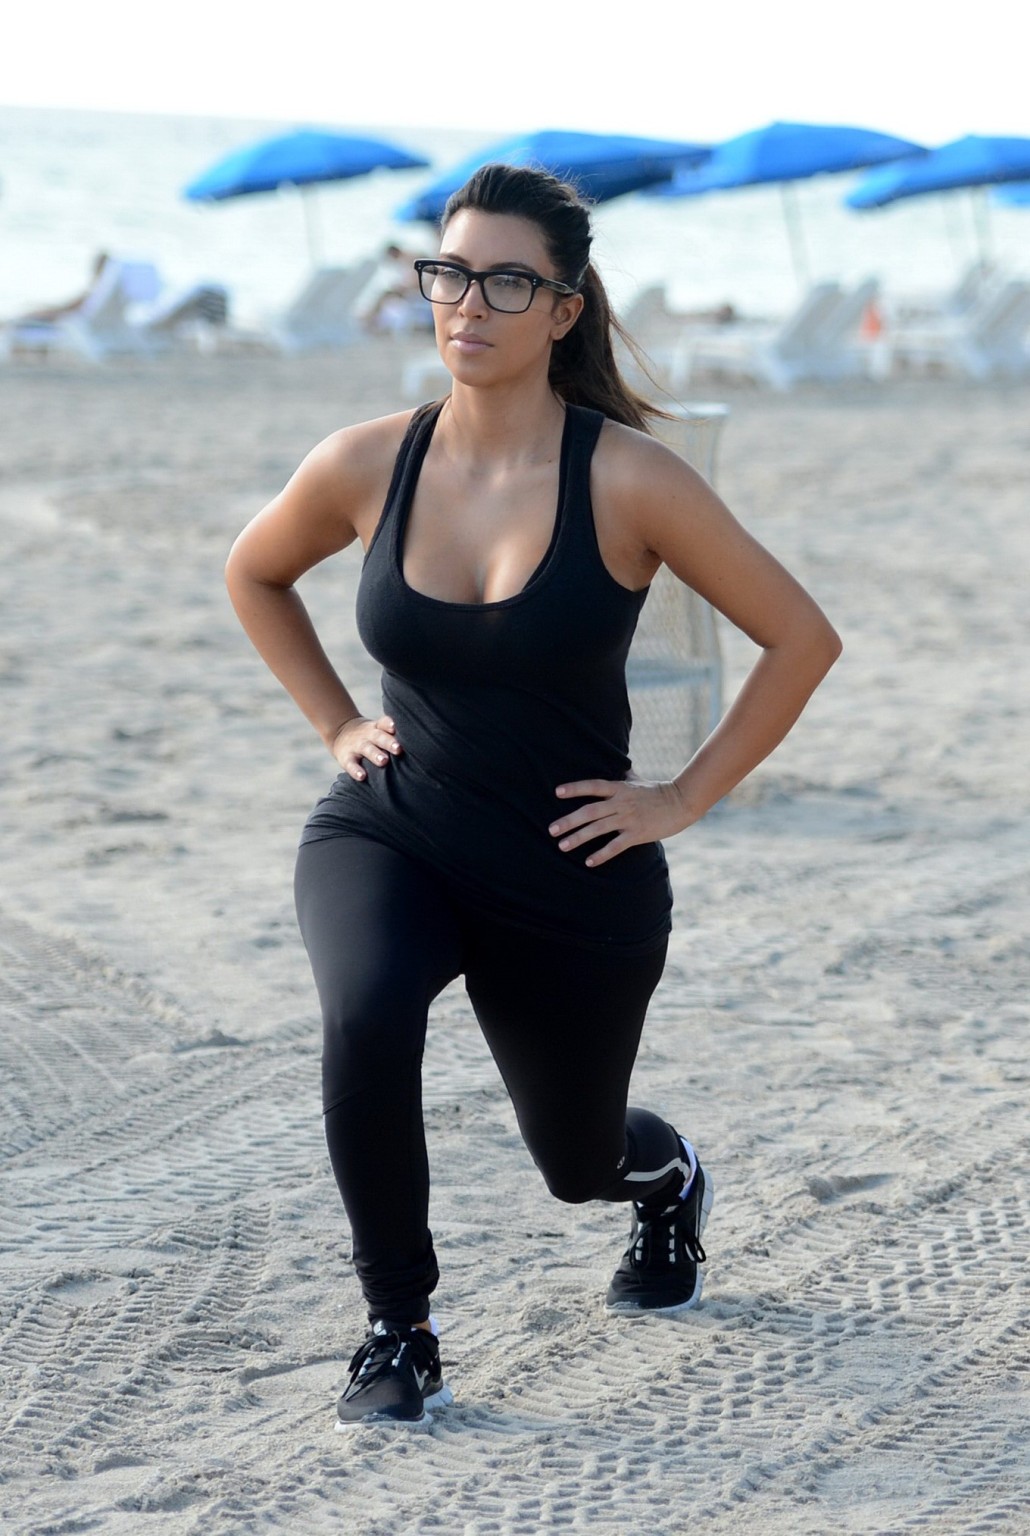 Kim Kardashian showing her sweaty cleavage  booty after a morning workout on a b #75251176